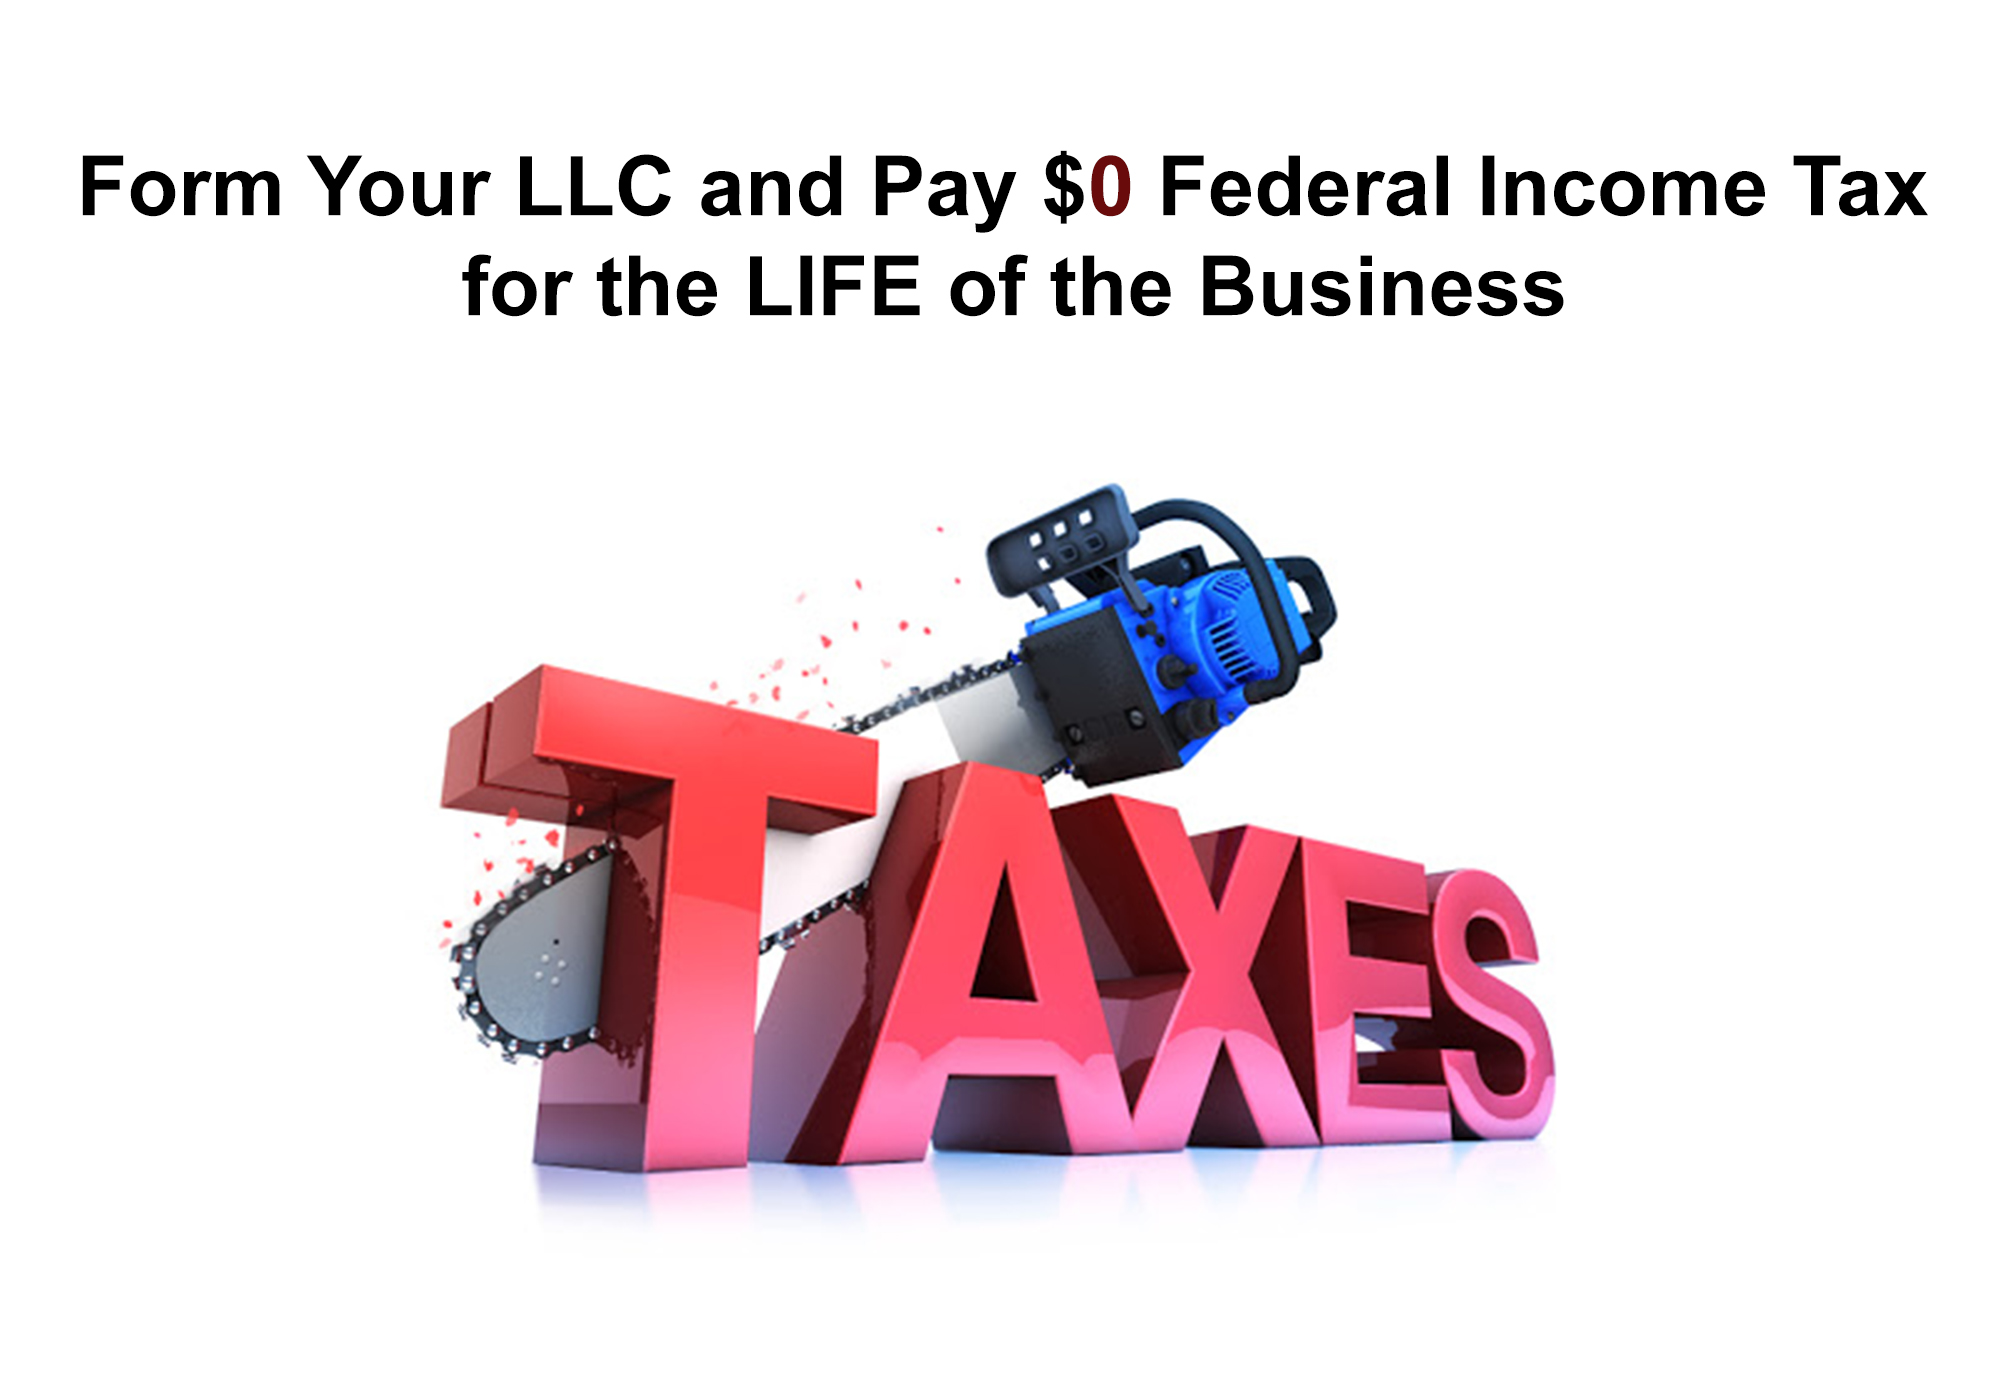 form your llc and pay $00 federal income tax for your business